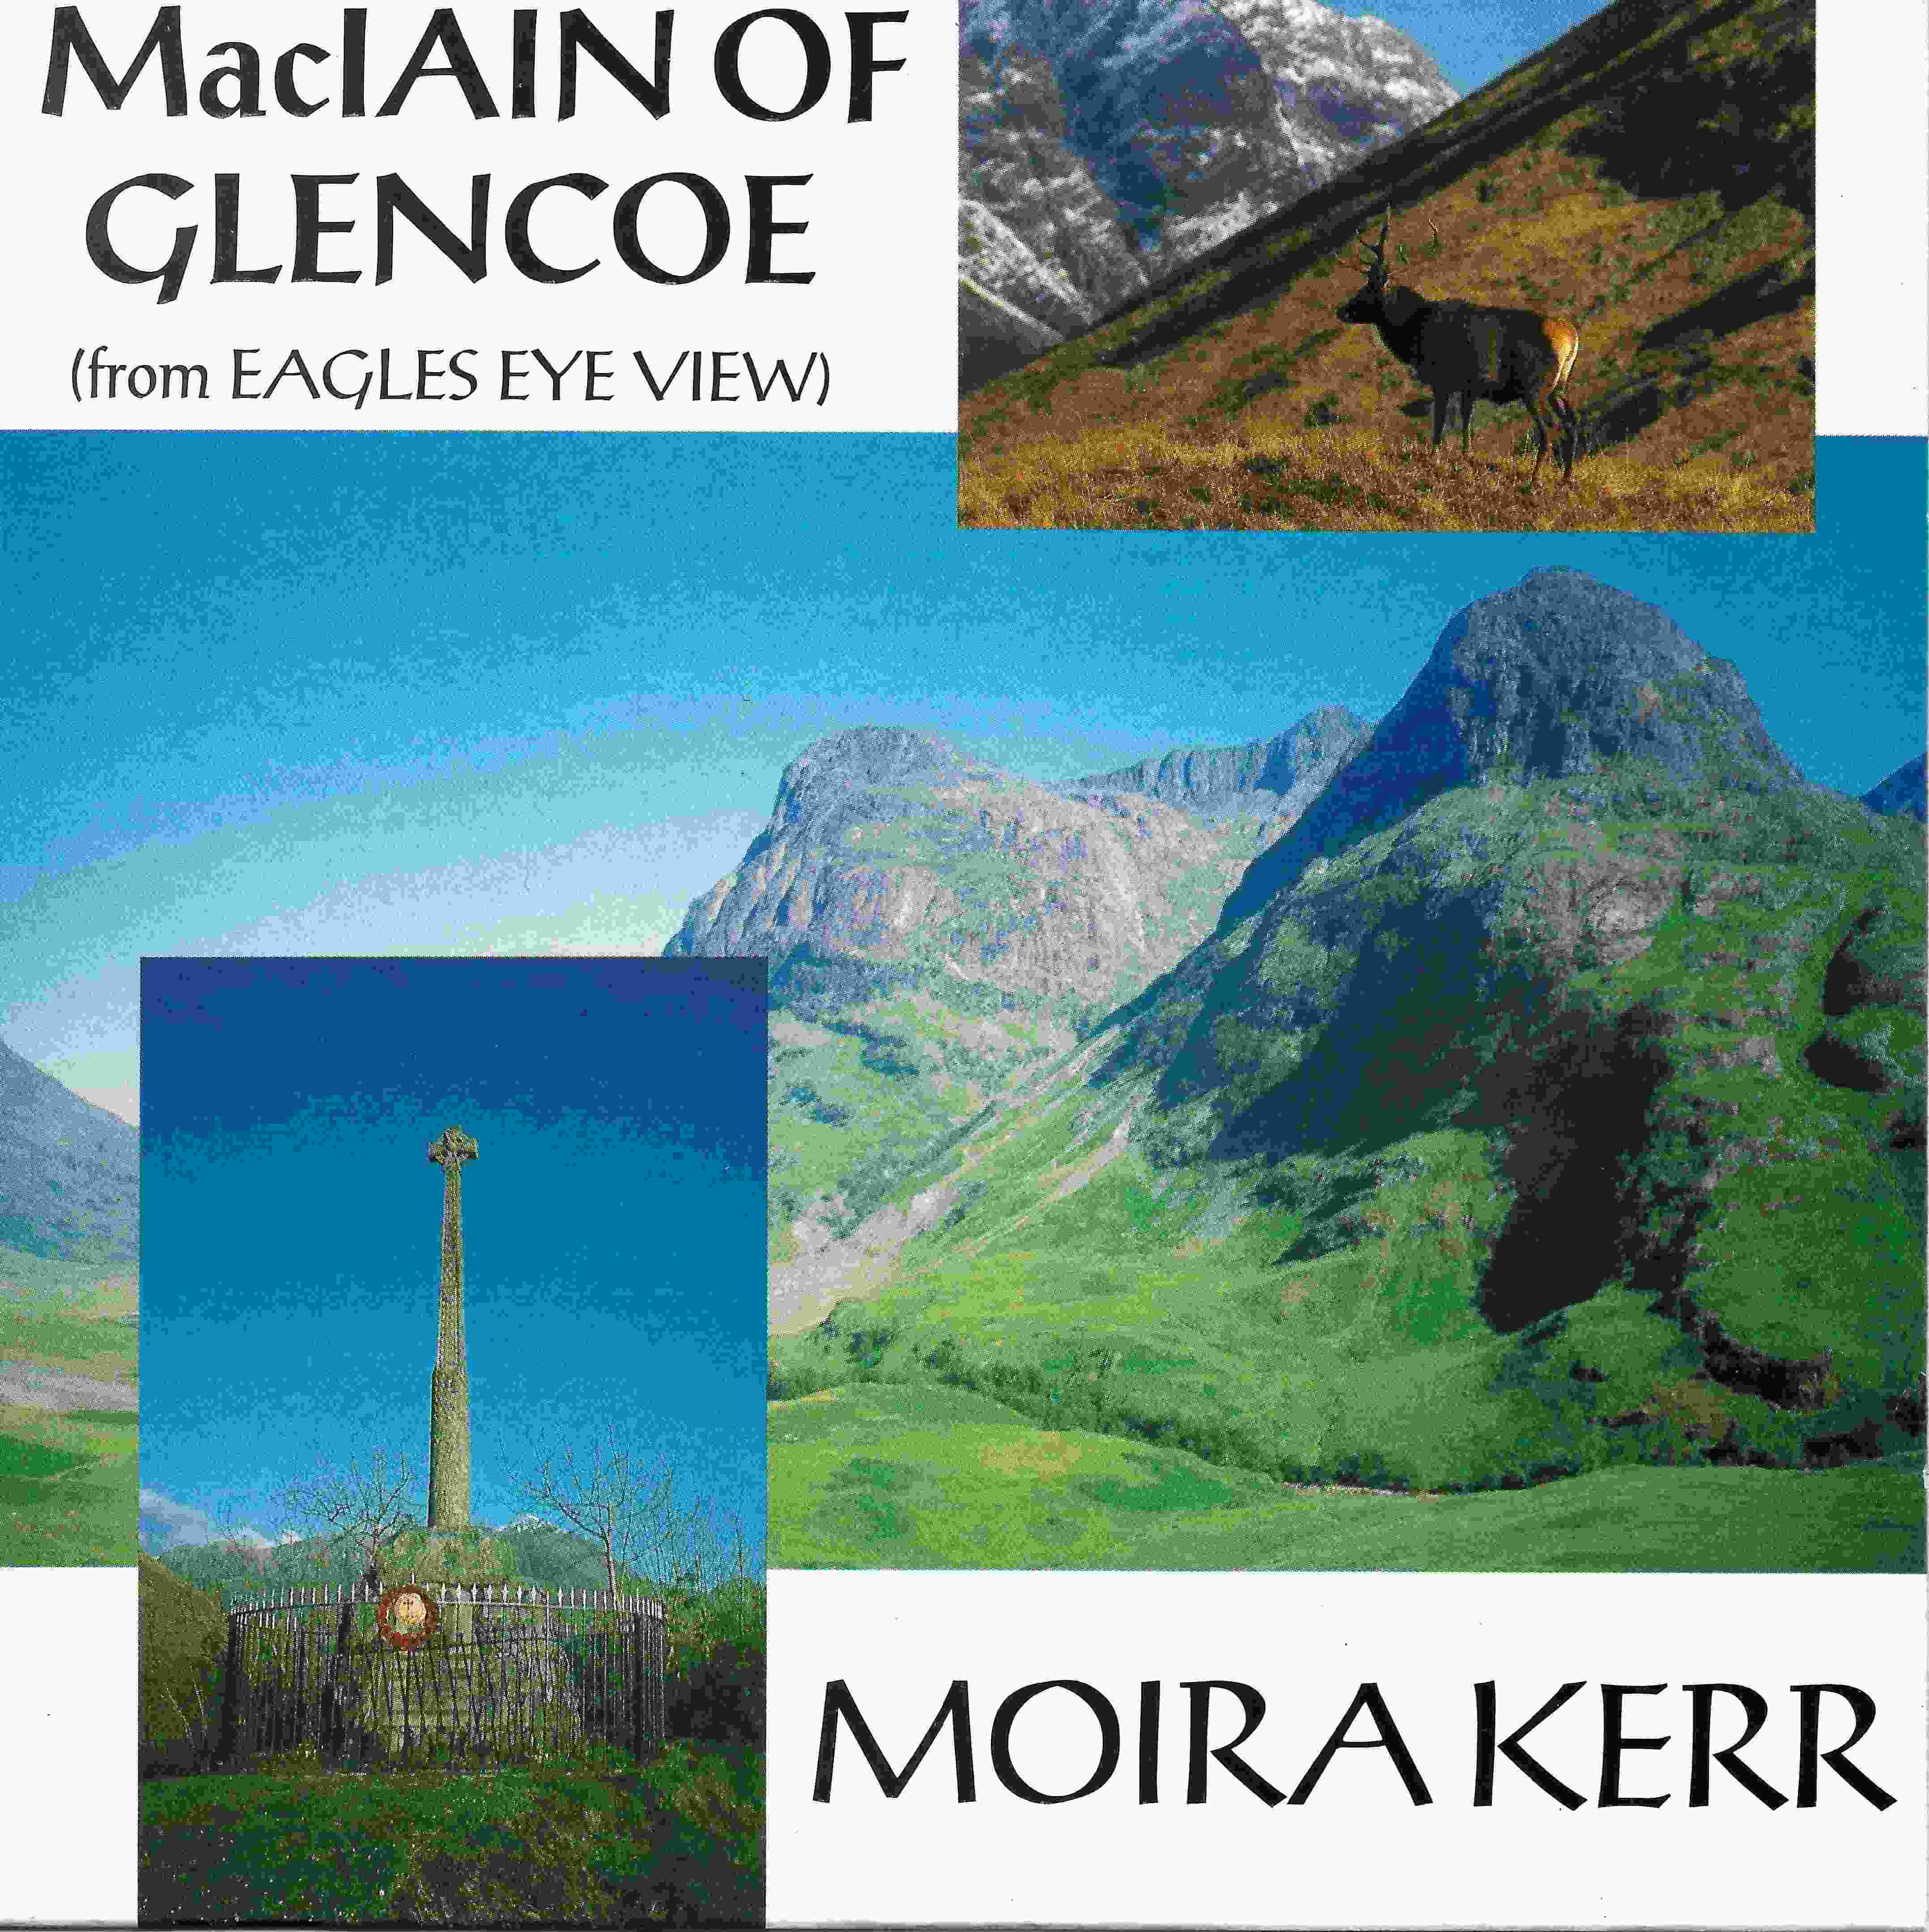 Picture of RESL 231 MacIain of Glencoe (Eagles eye view) by artist Moira Kerr from the BBC singles - Records and Tapes library